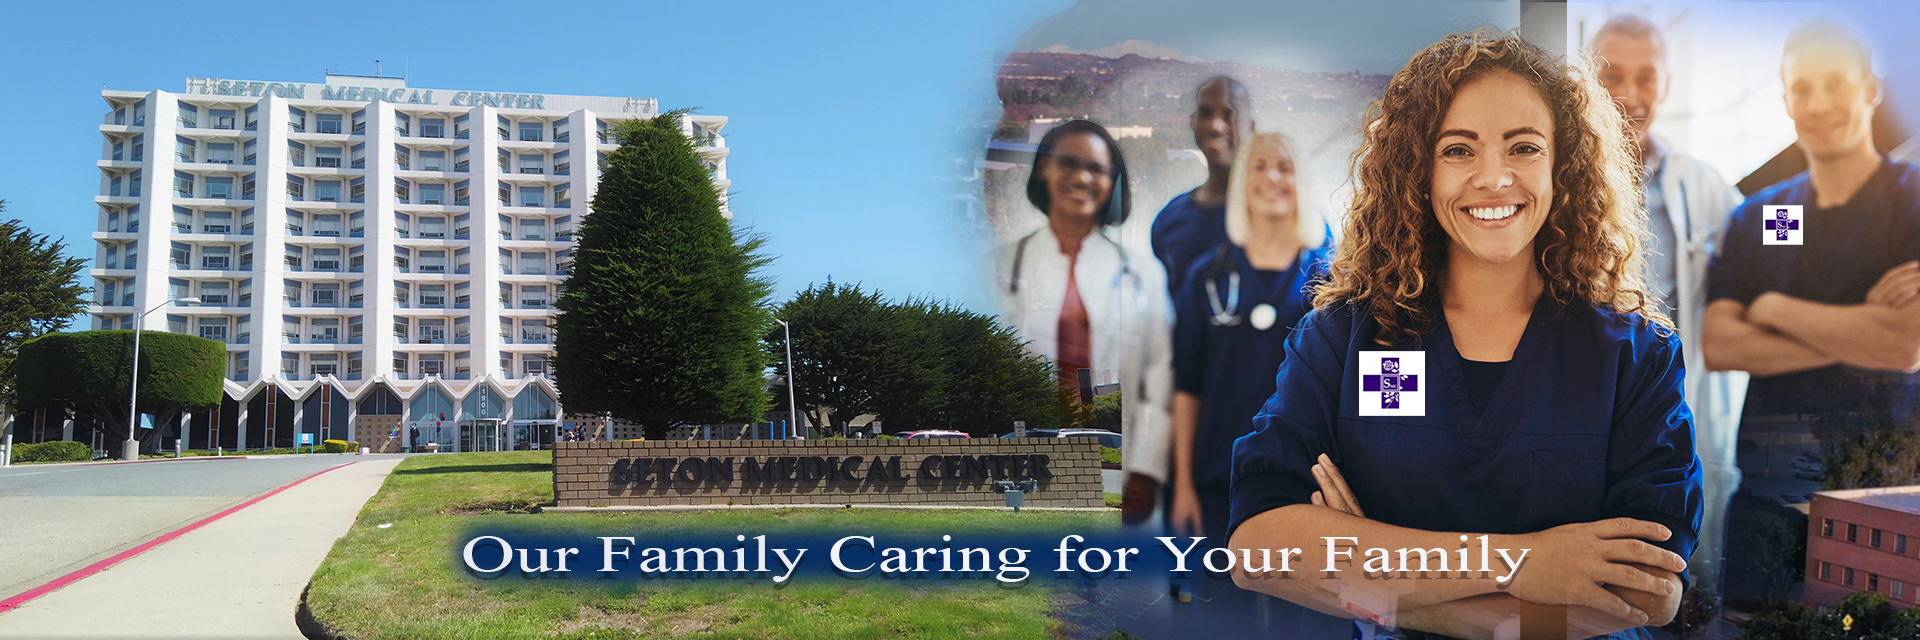 Our Family Caring for Your Family.

SETON MEDICAL CENTER